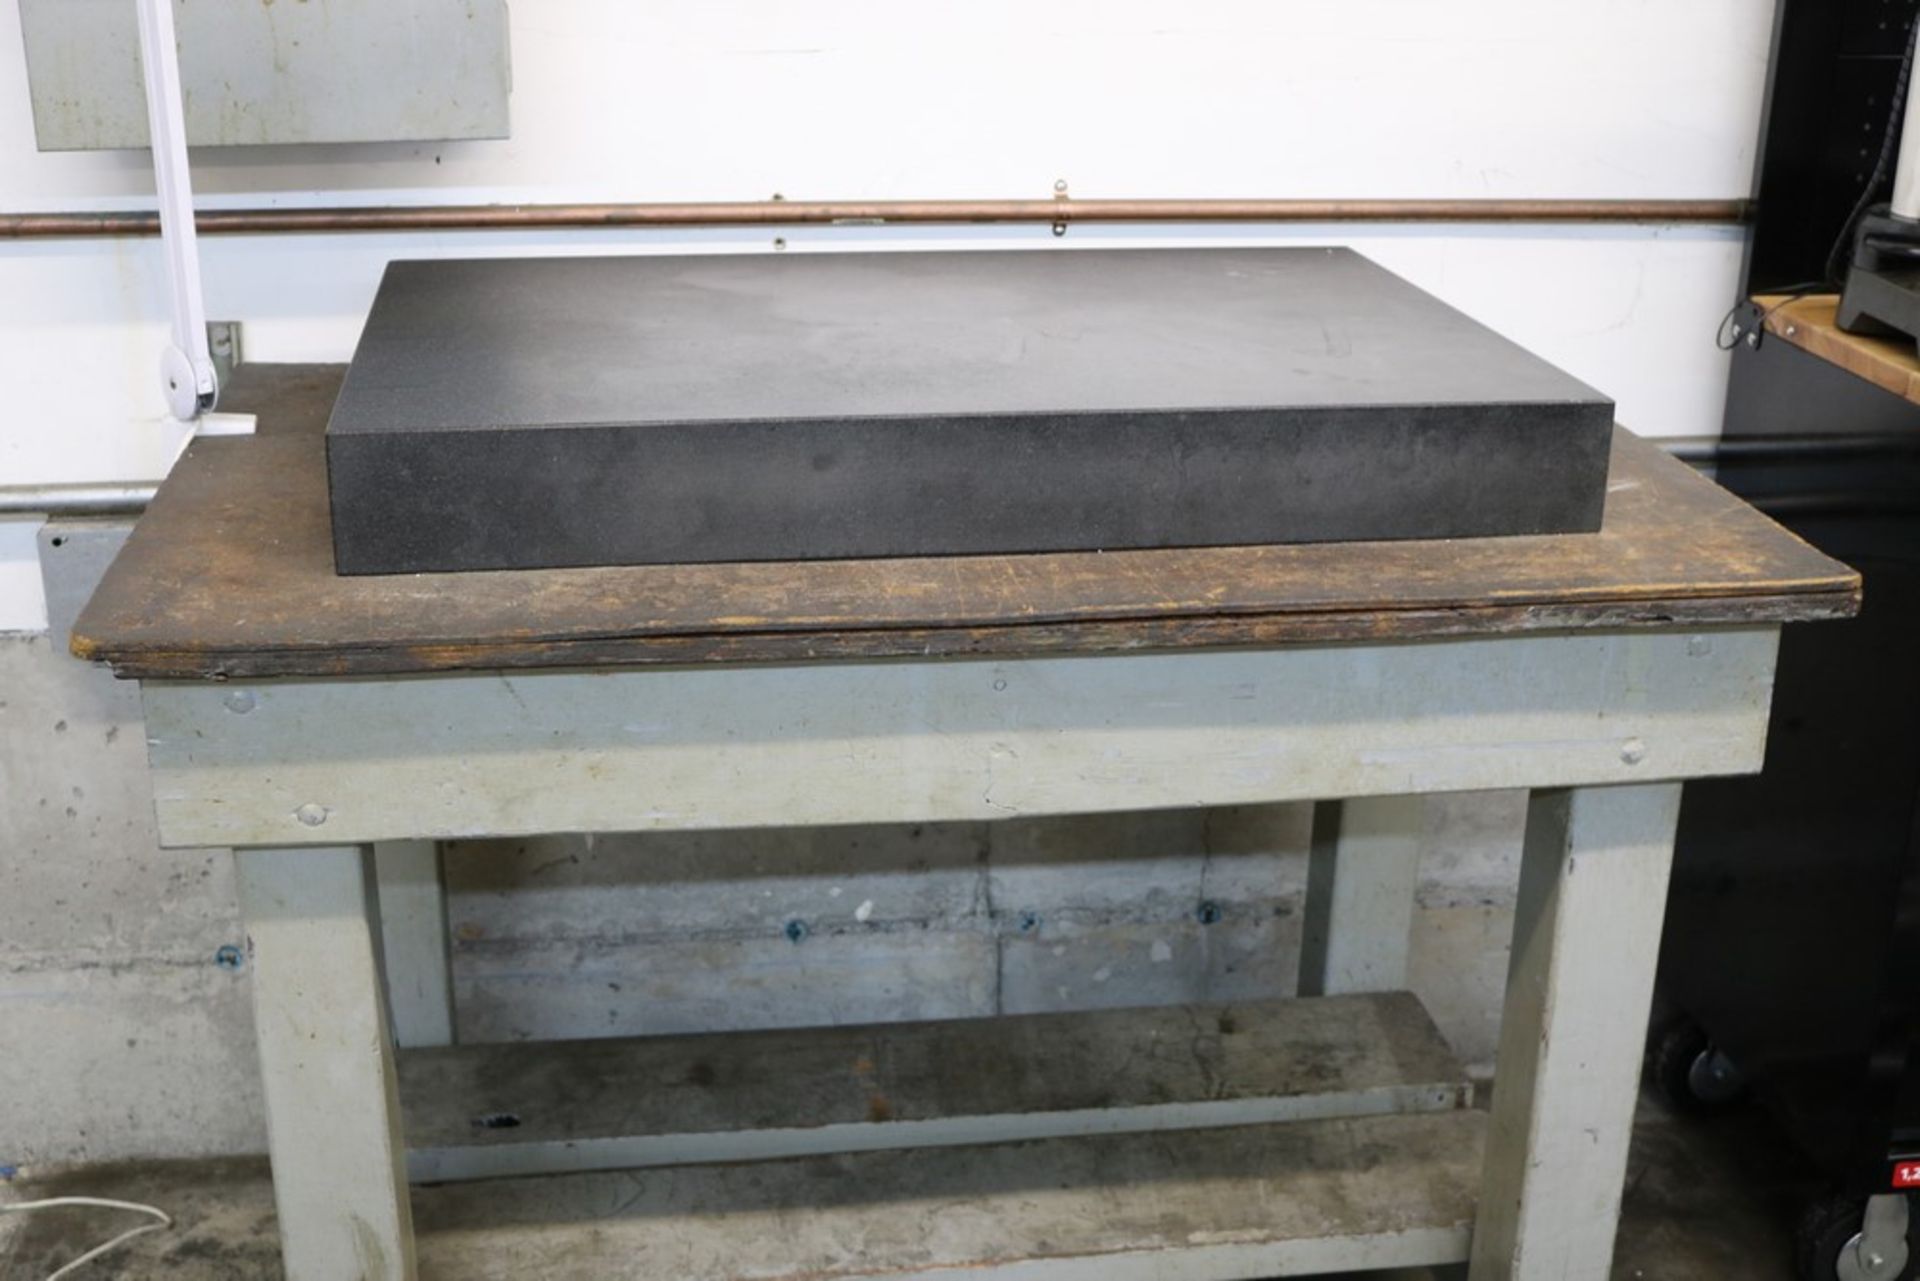 Black Granite Surface Plate and Wood Shop Table 24" x 36" x 4"